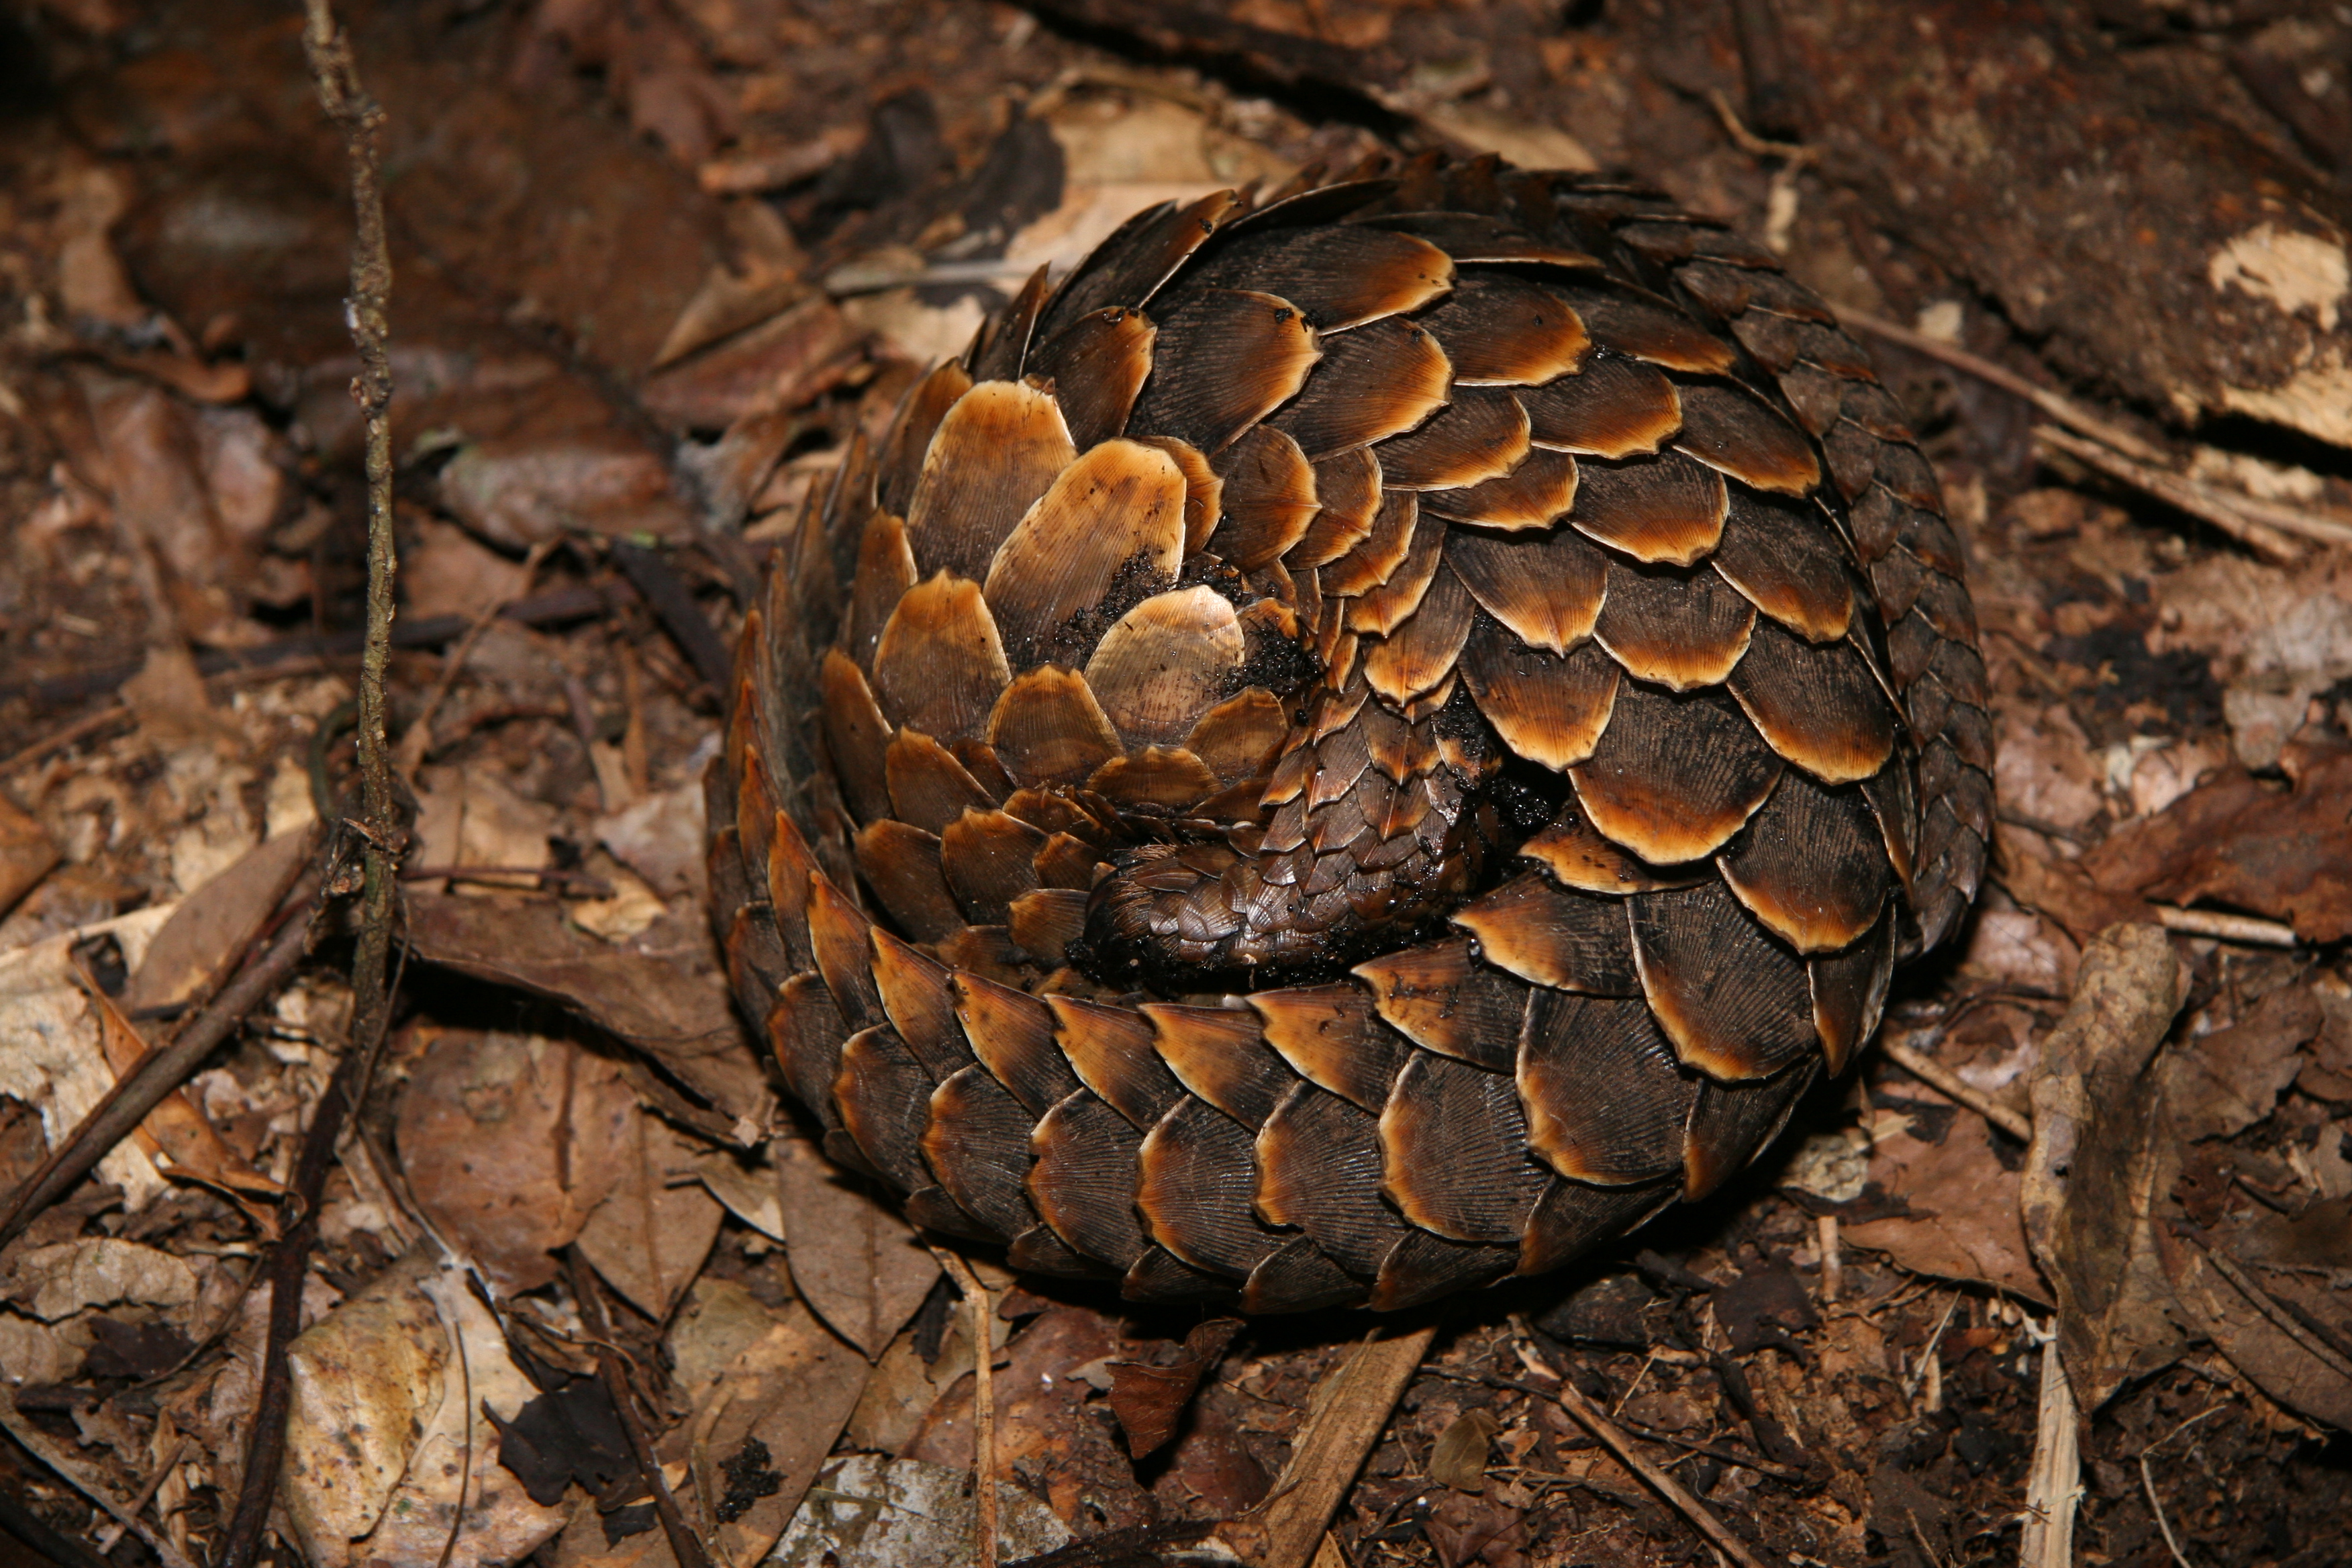 Image result for pangolin